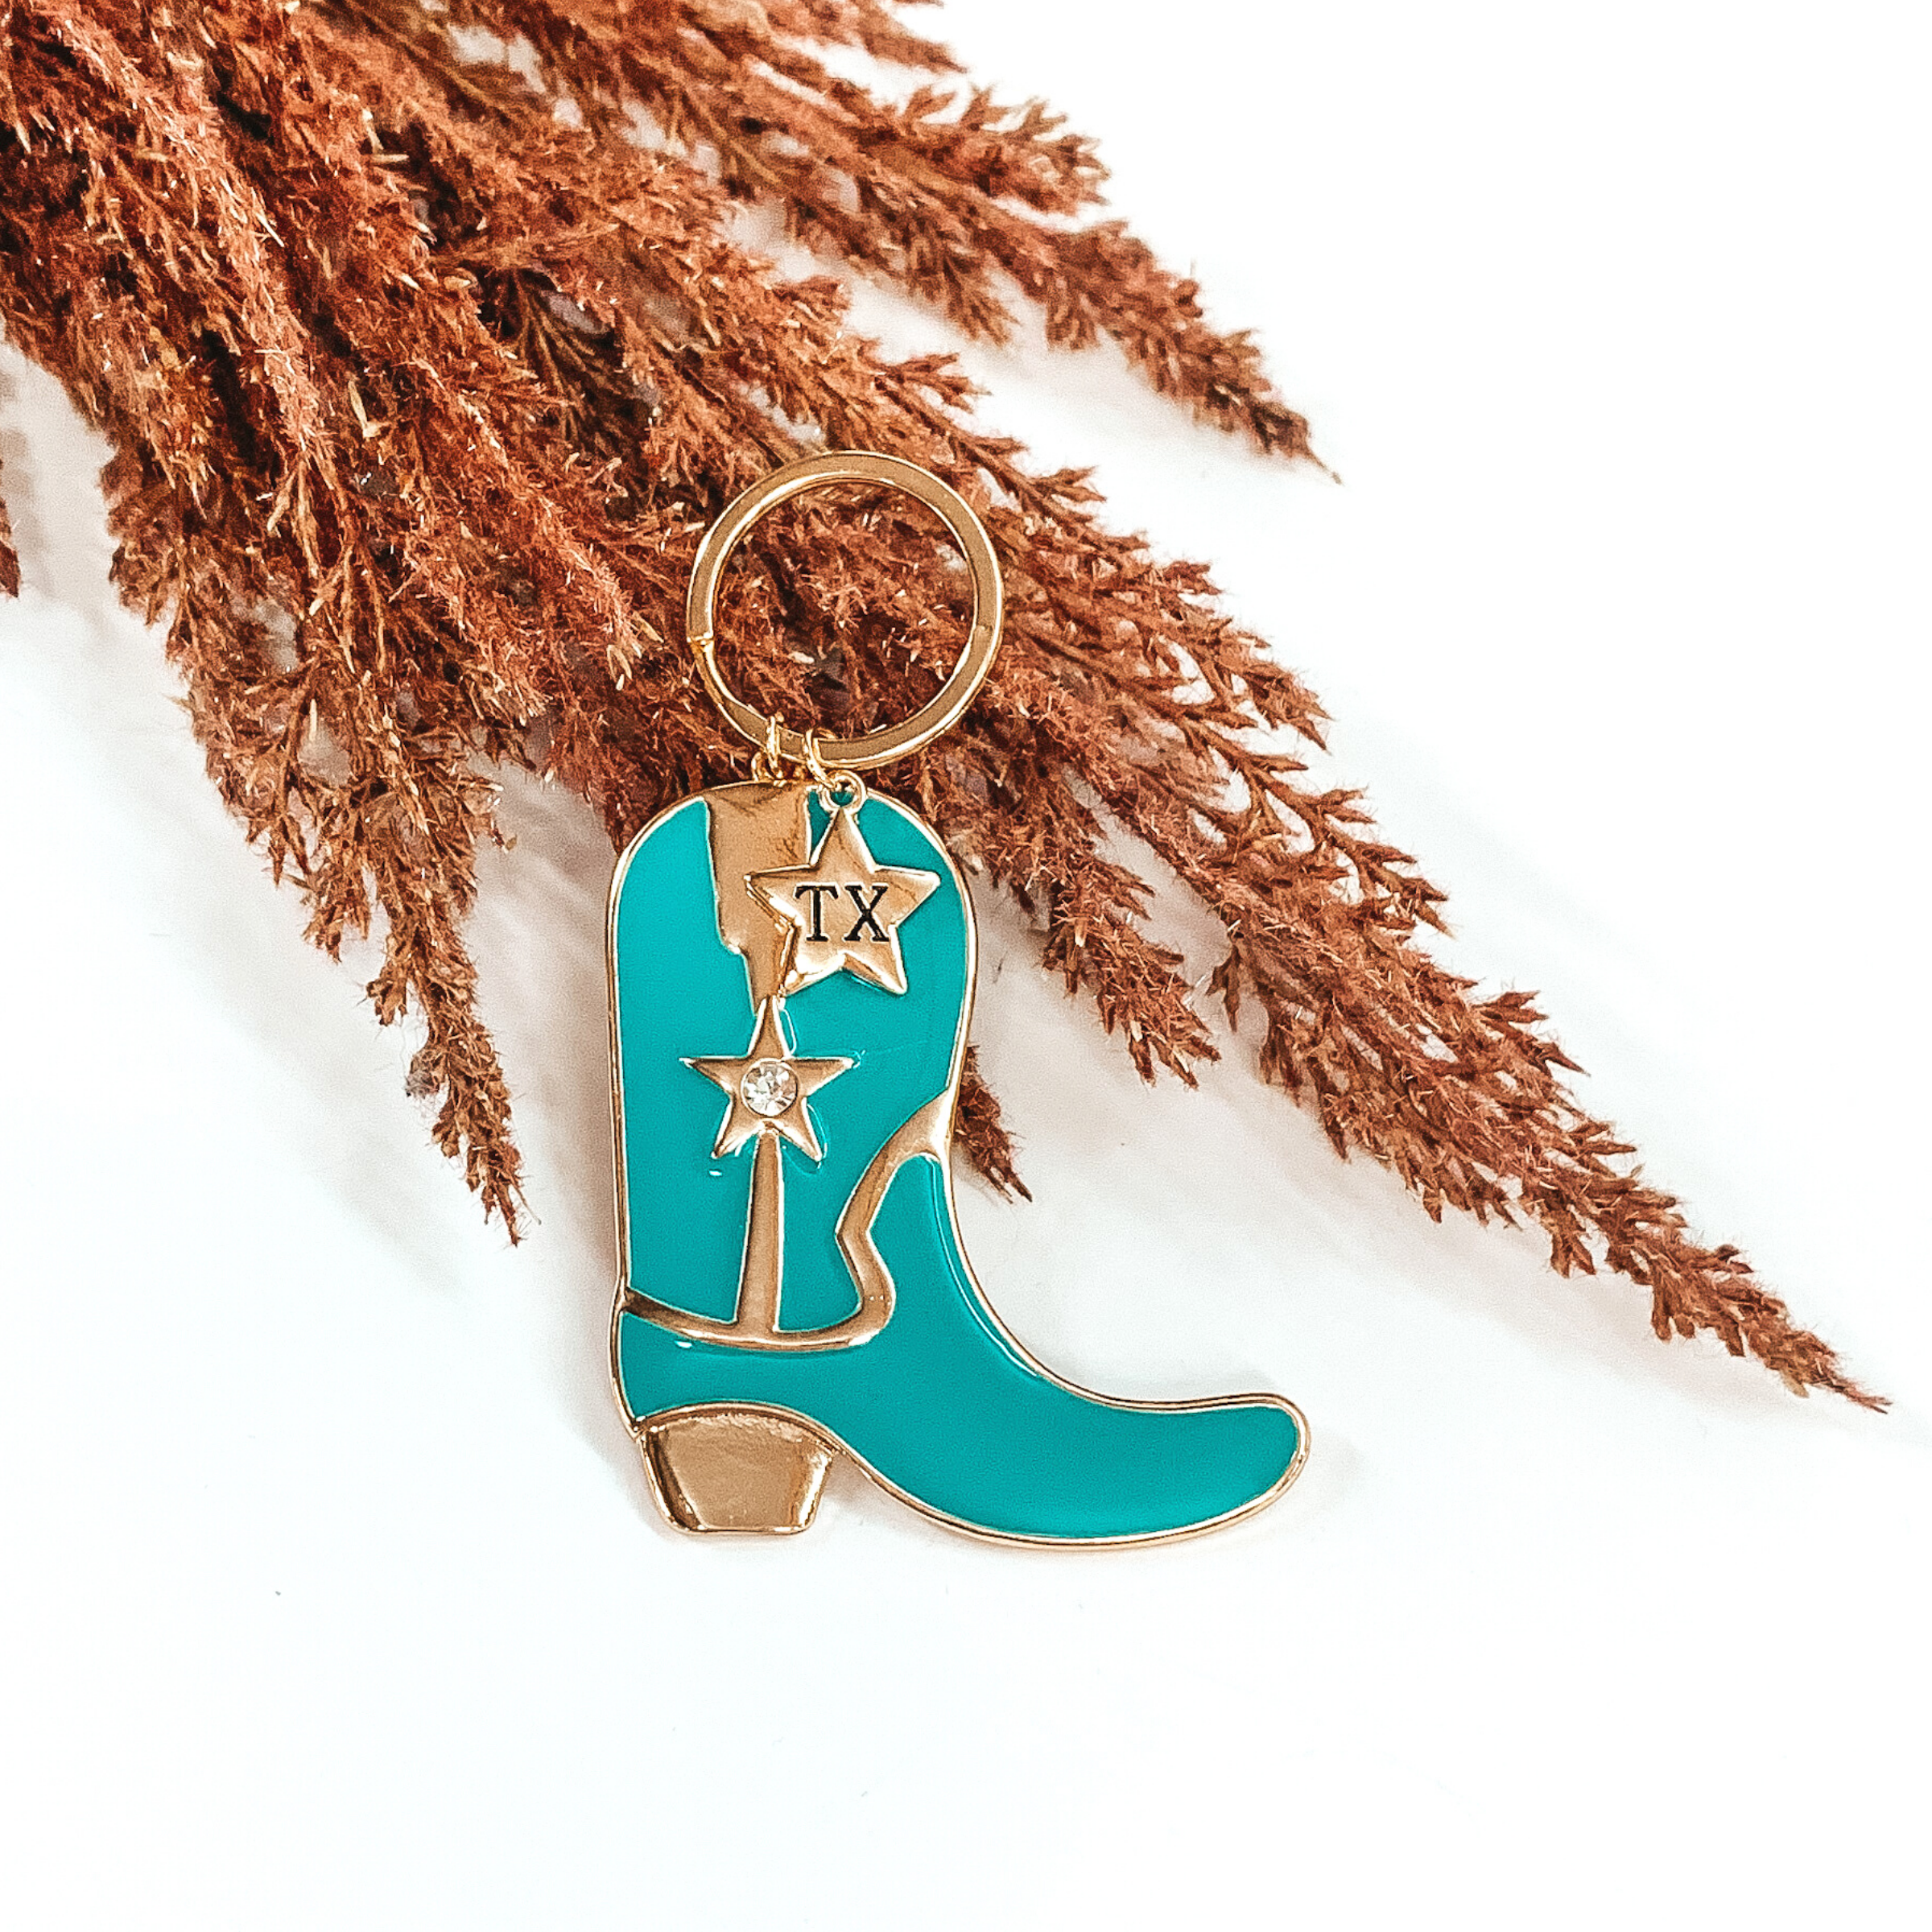 Turquoise cowboy boot key chain outline in gold. This key chain has a gold key ring and a gold star pendant with the letters "TX". This key chain is pictured laying on some brown floral on a white background. 